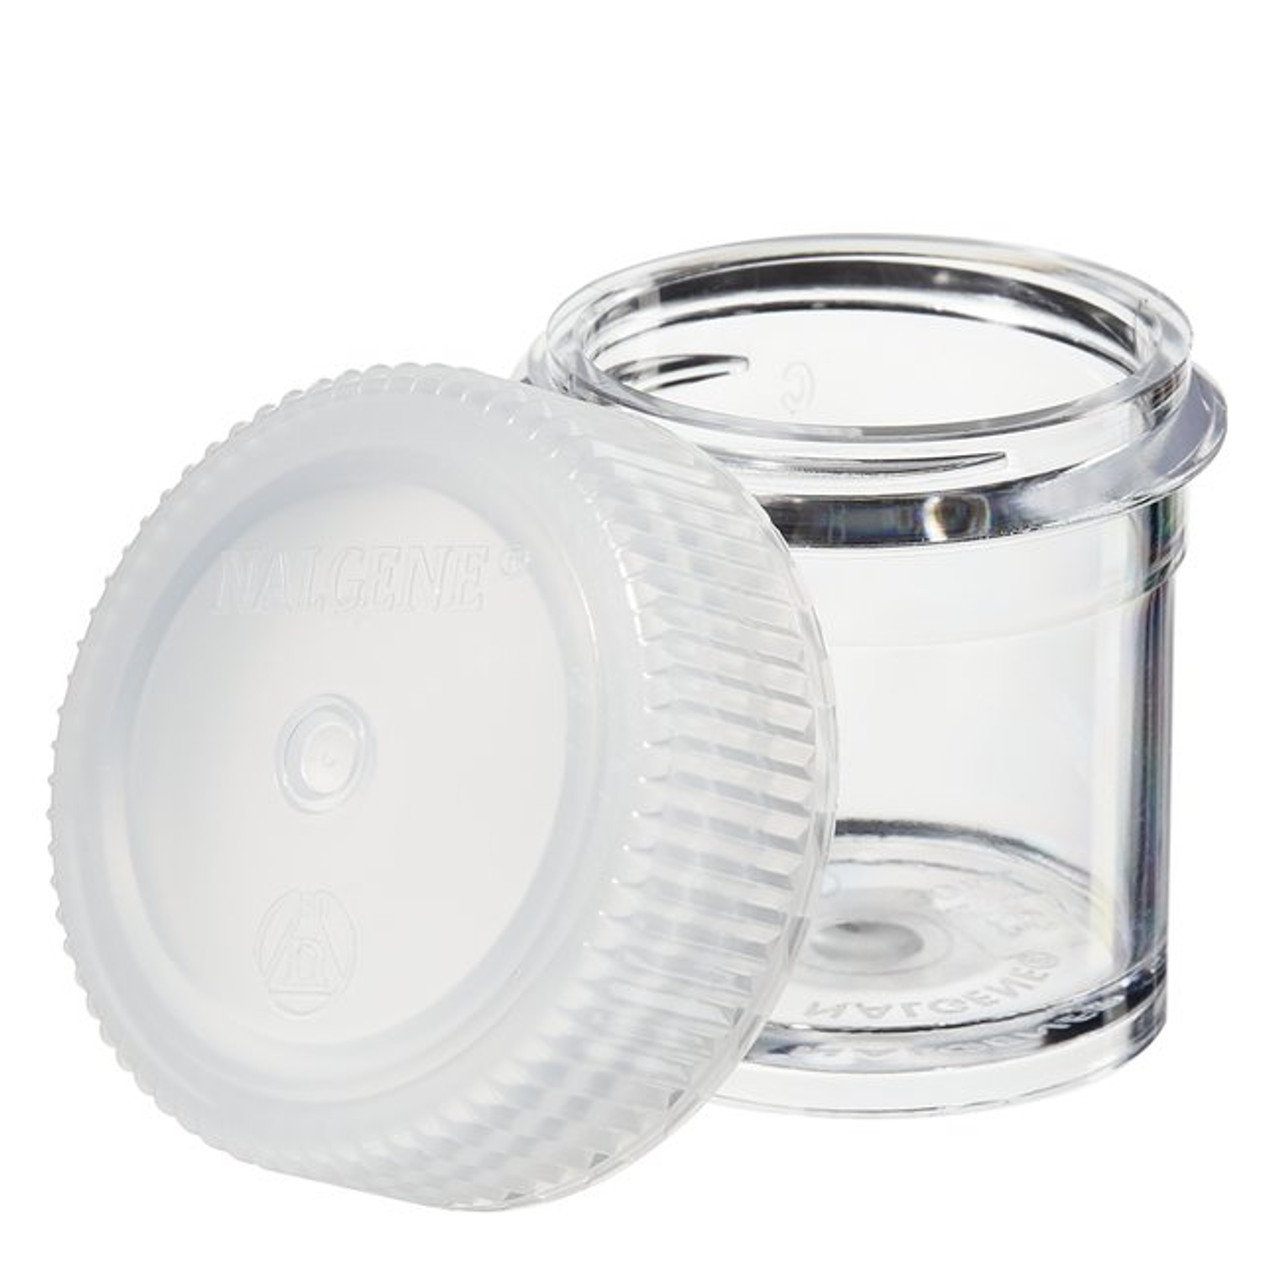 2 Pcs Glass Spice Jars/Bottles - 3oz Empty Round Spice Containers with  Airtight Metal Caps with Shaker Lids (2, clear)